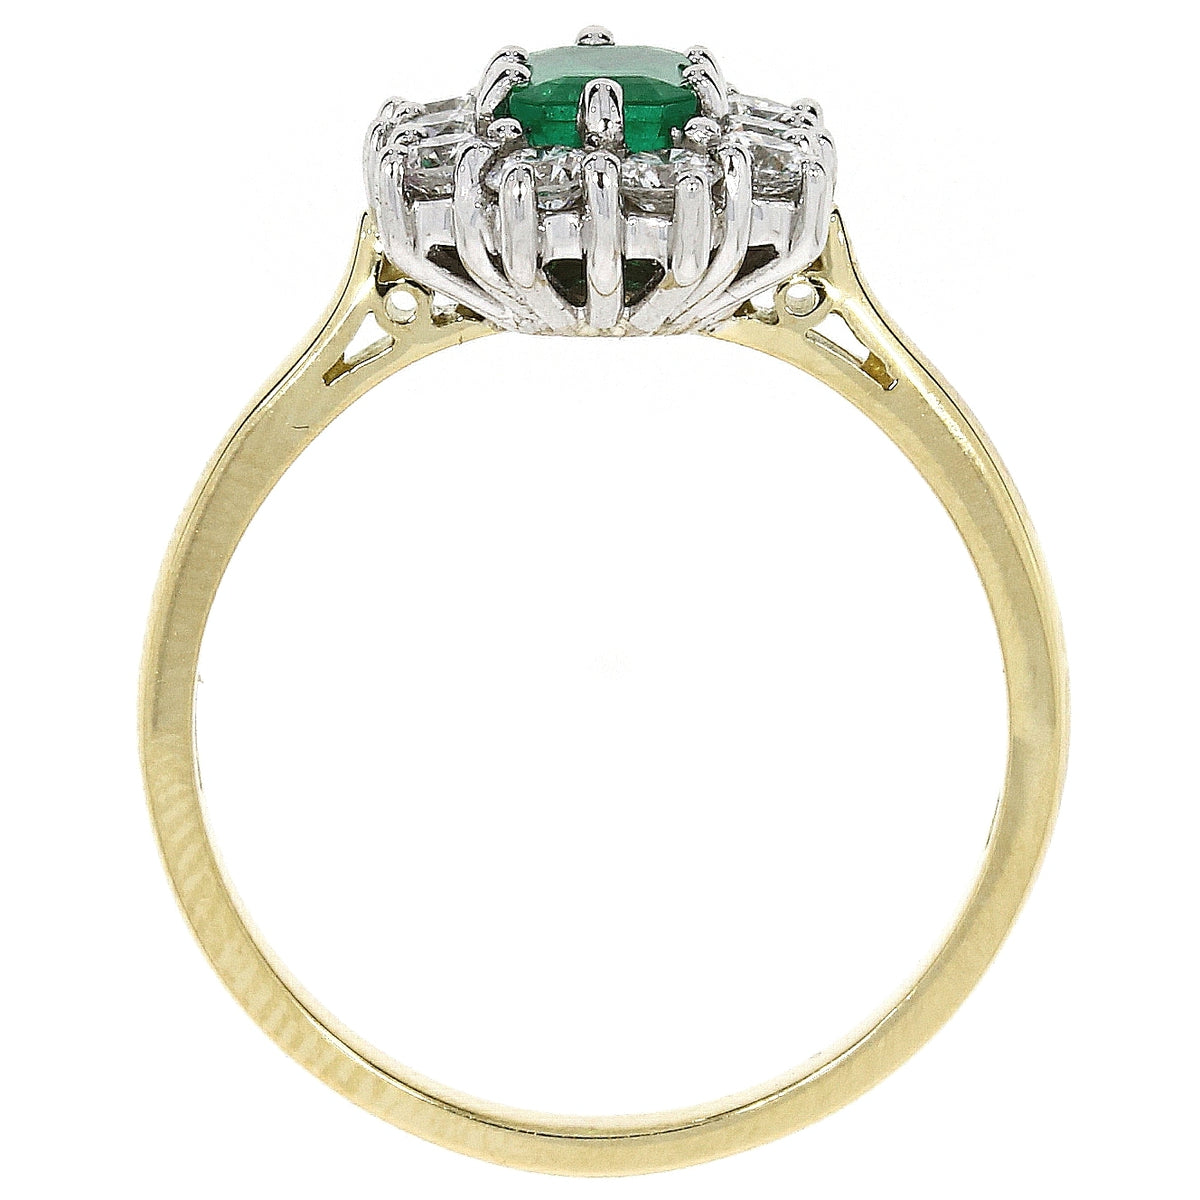 18ct Yellow gold and White Gold Claw set Emerald cut Emerald and Diamond ring